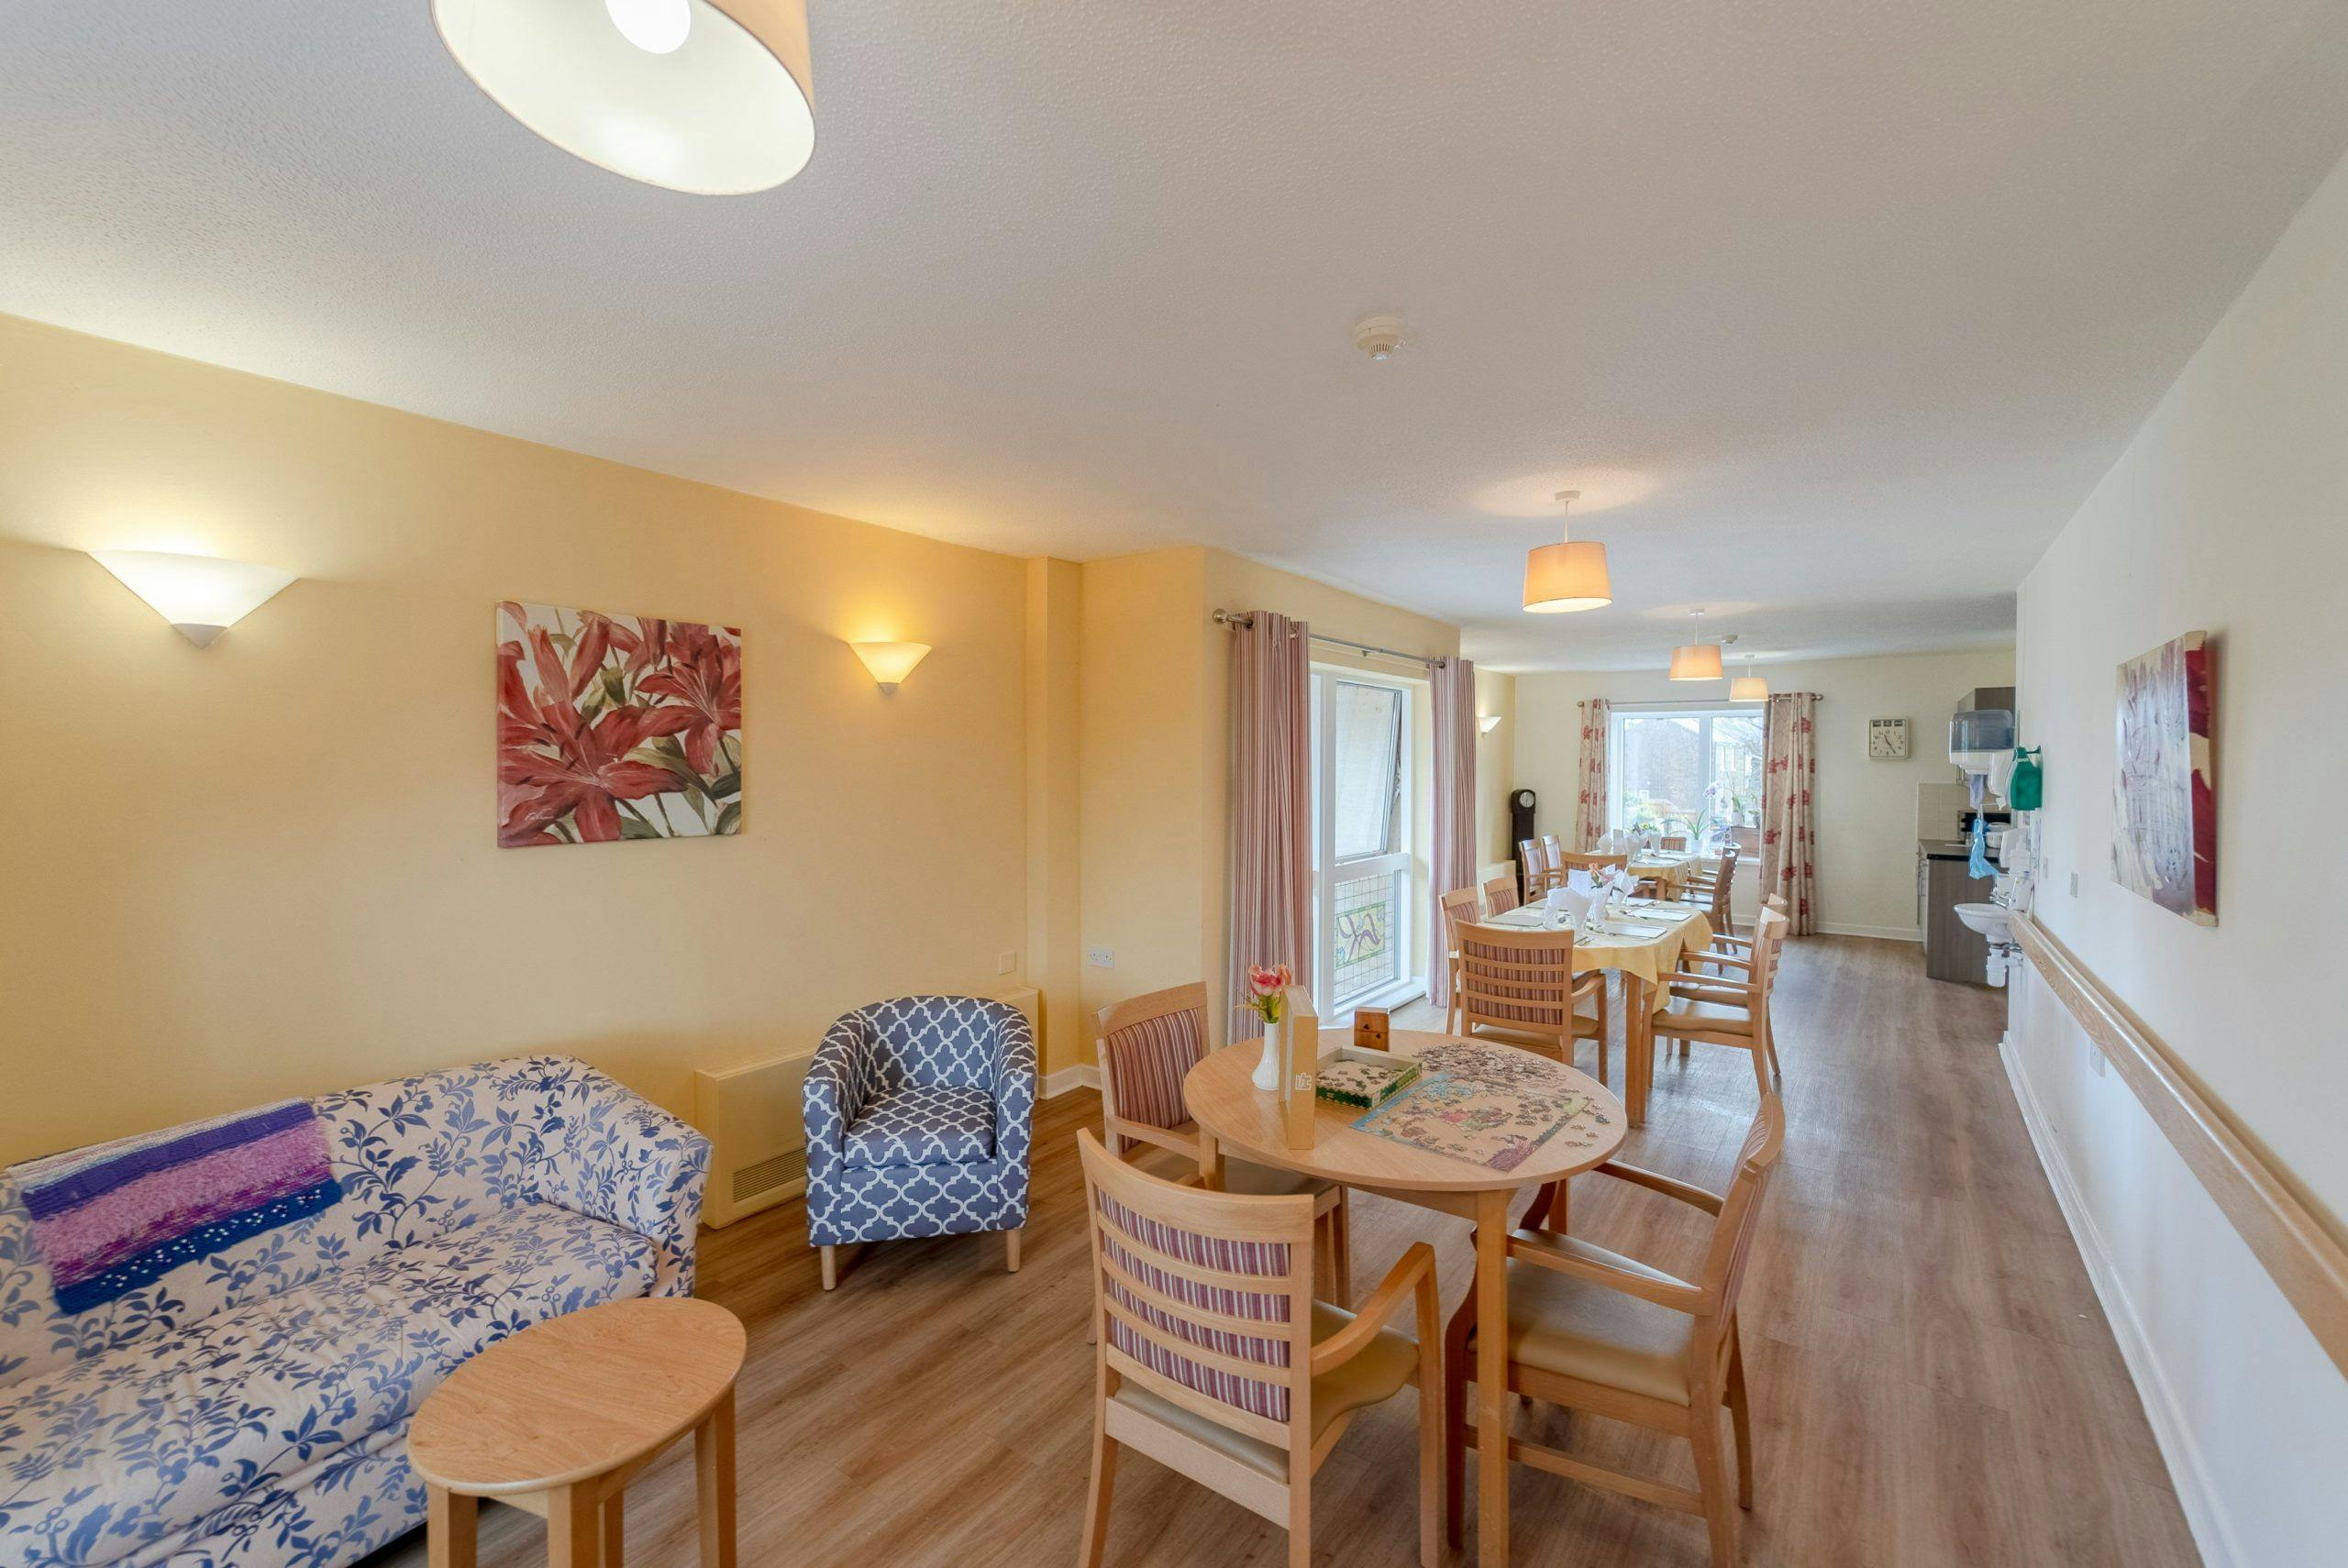 Lounge/Dining area of Vera James House care home in Ely, Cambridgeshire